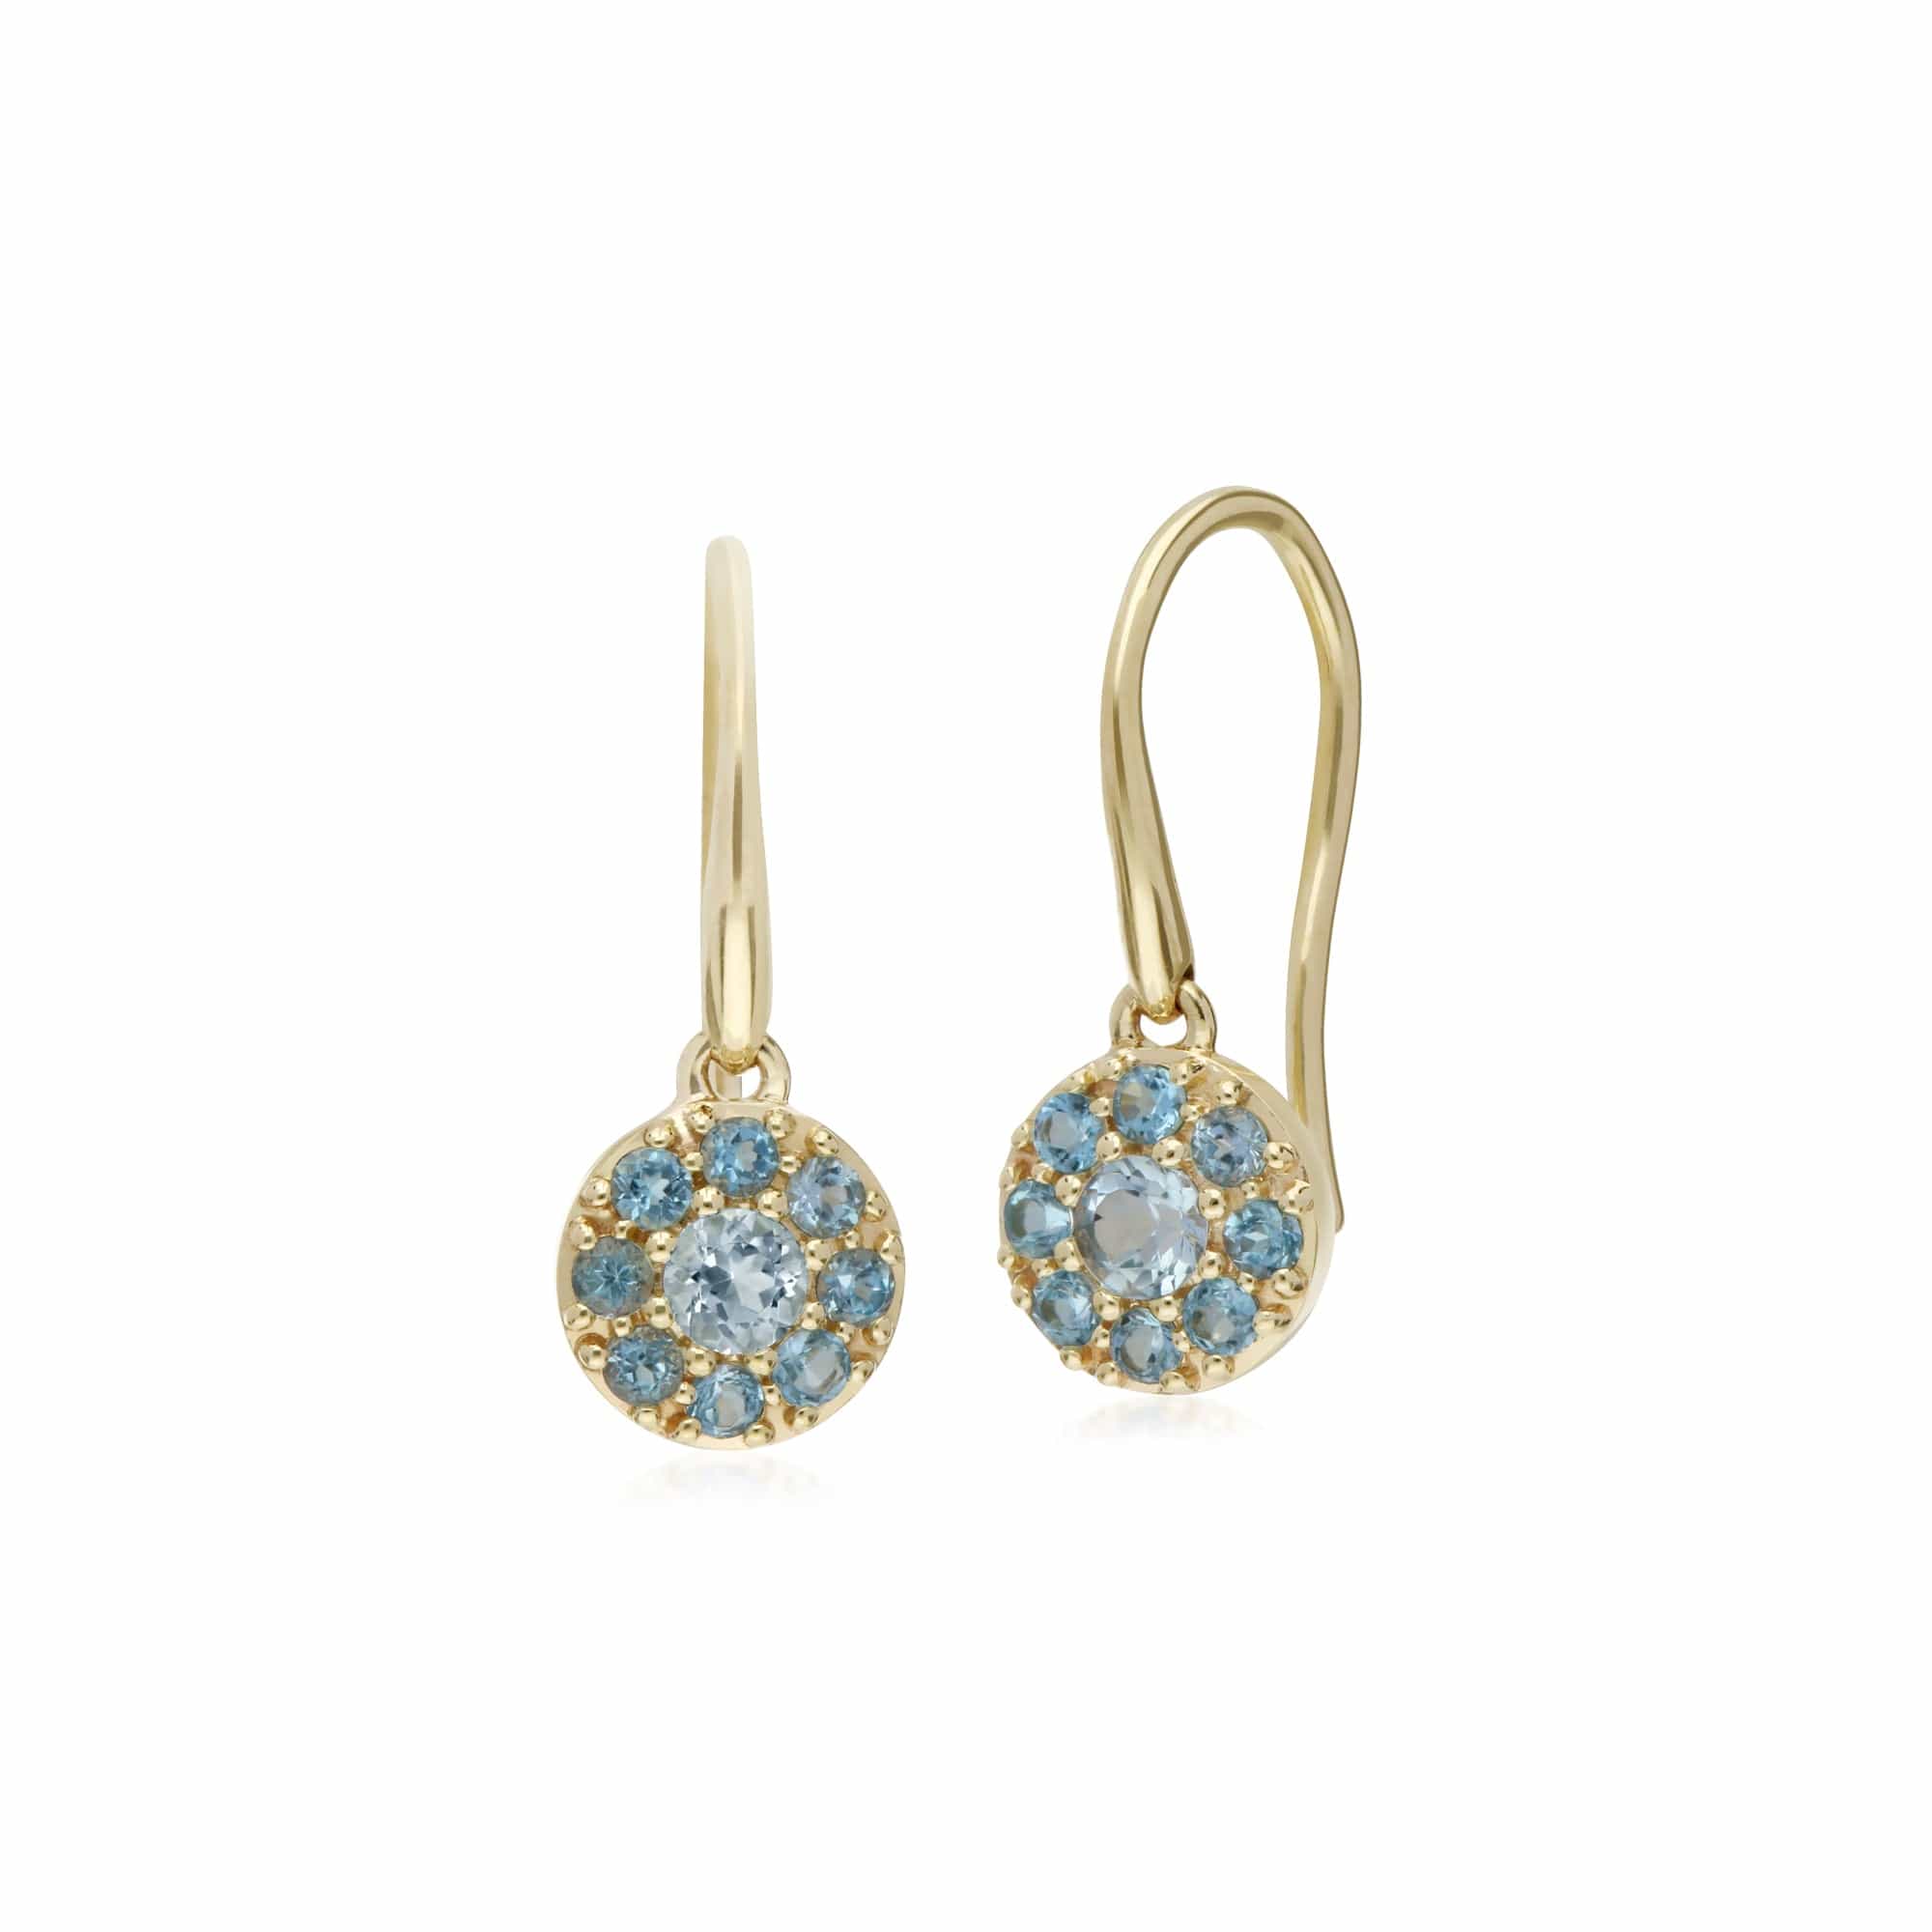 135E1573059-135P1910059 Classic Round Blue Topaz Cluster Drop Earrings & Pendant Set in 9ct Yellow Gold 2